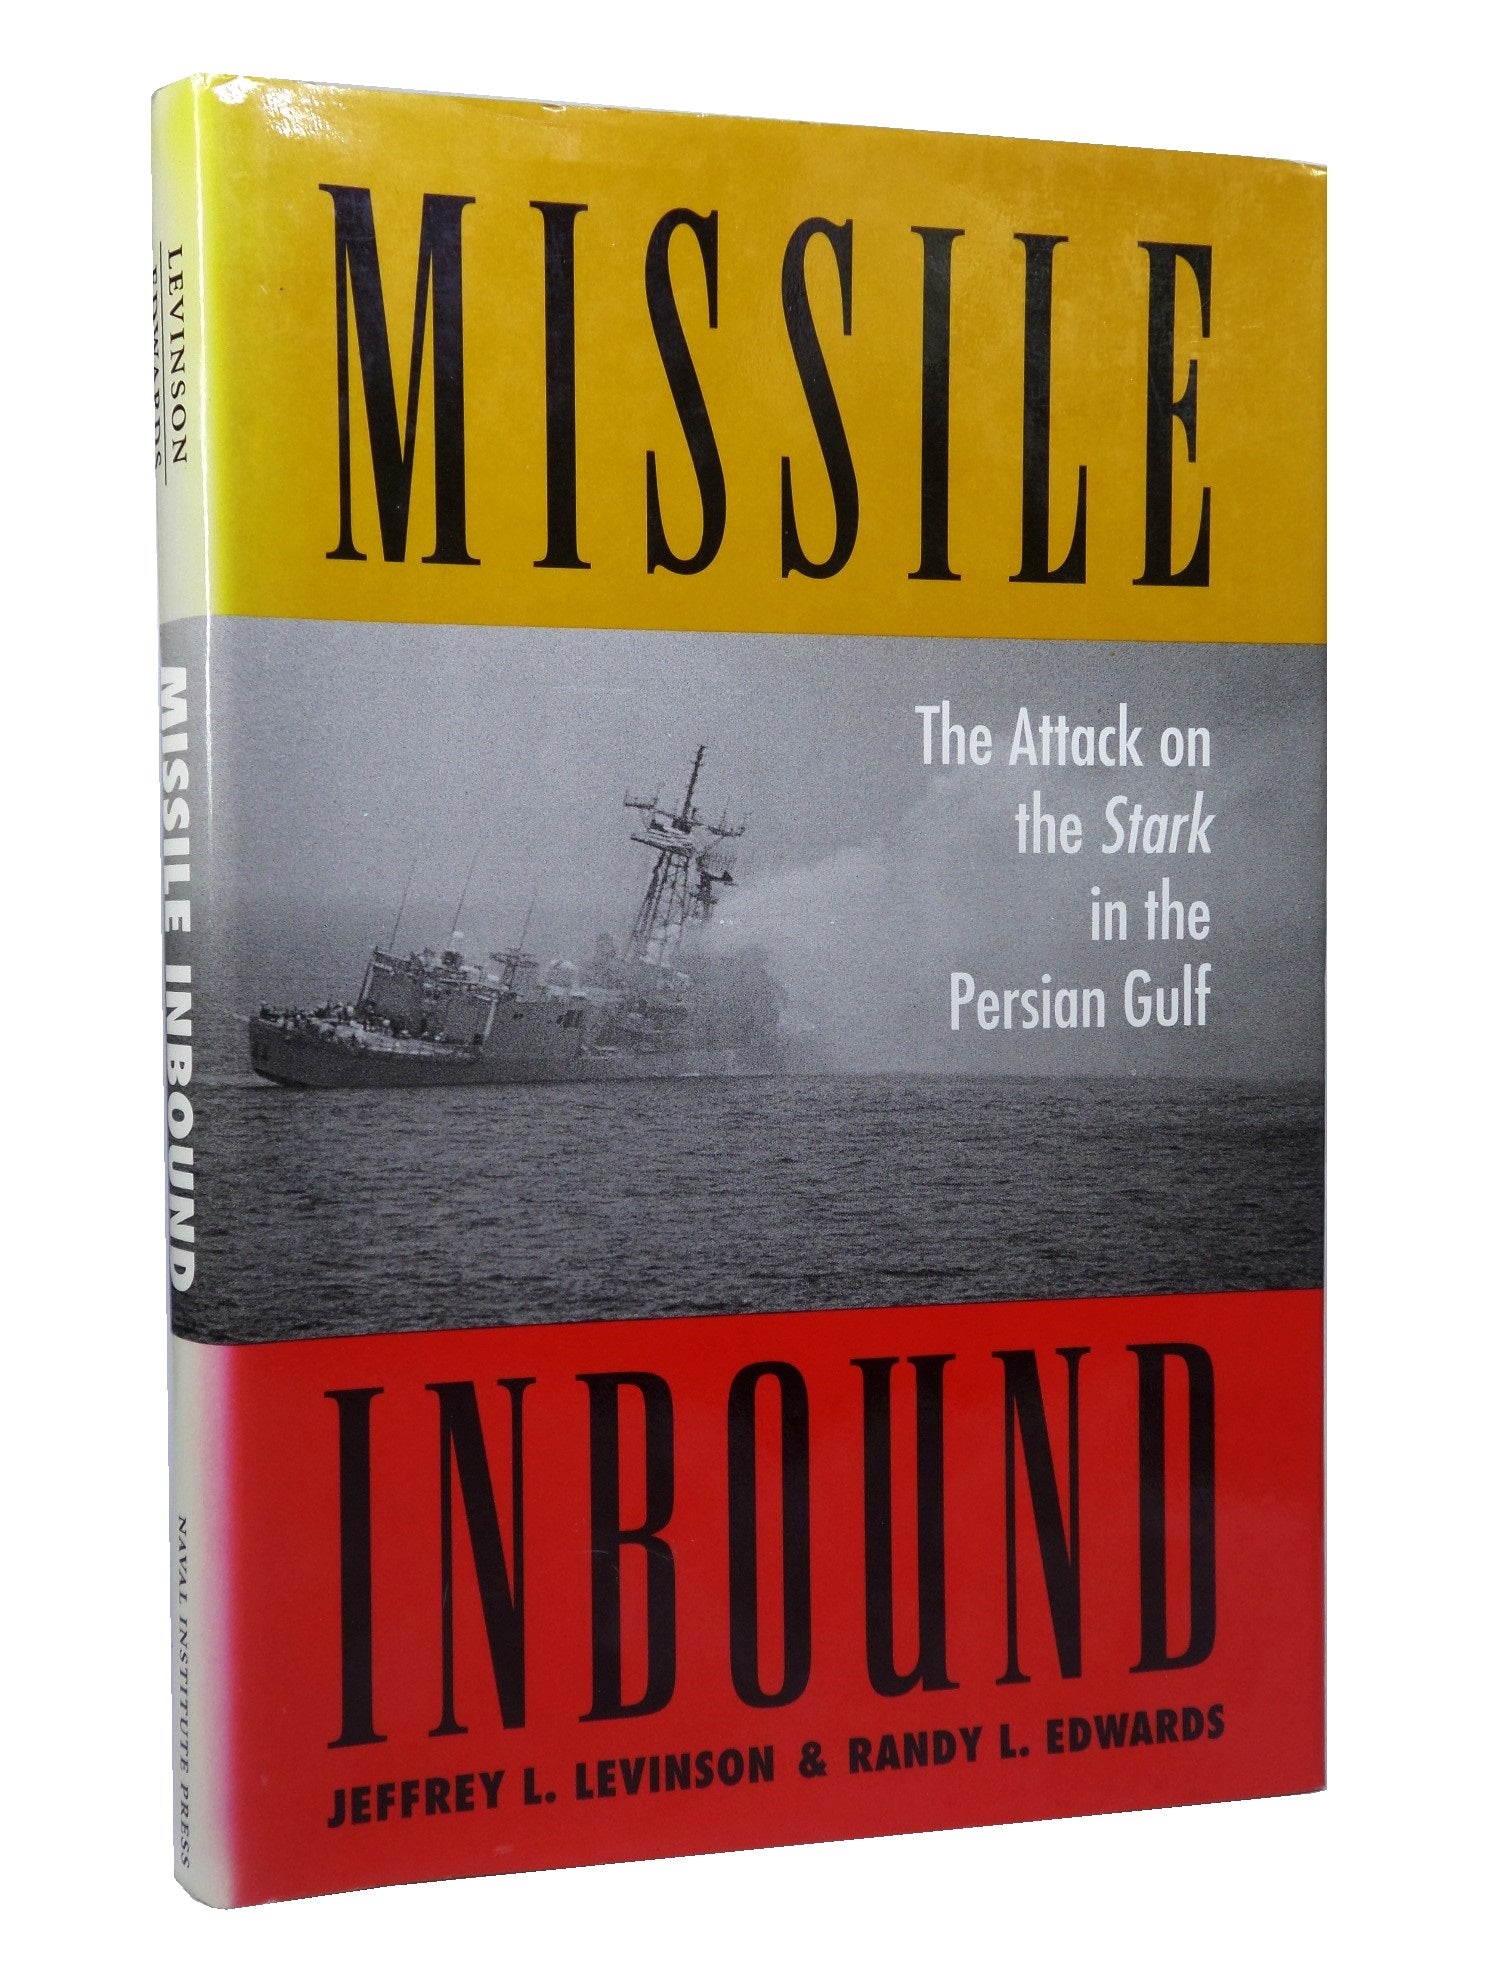 MISSILE INBOUND: THE ATTACK ON THE STARK IN THE PERSIAN GULF BY JEFFREY LEVINSON